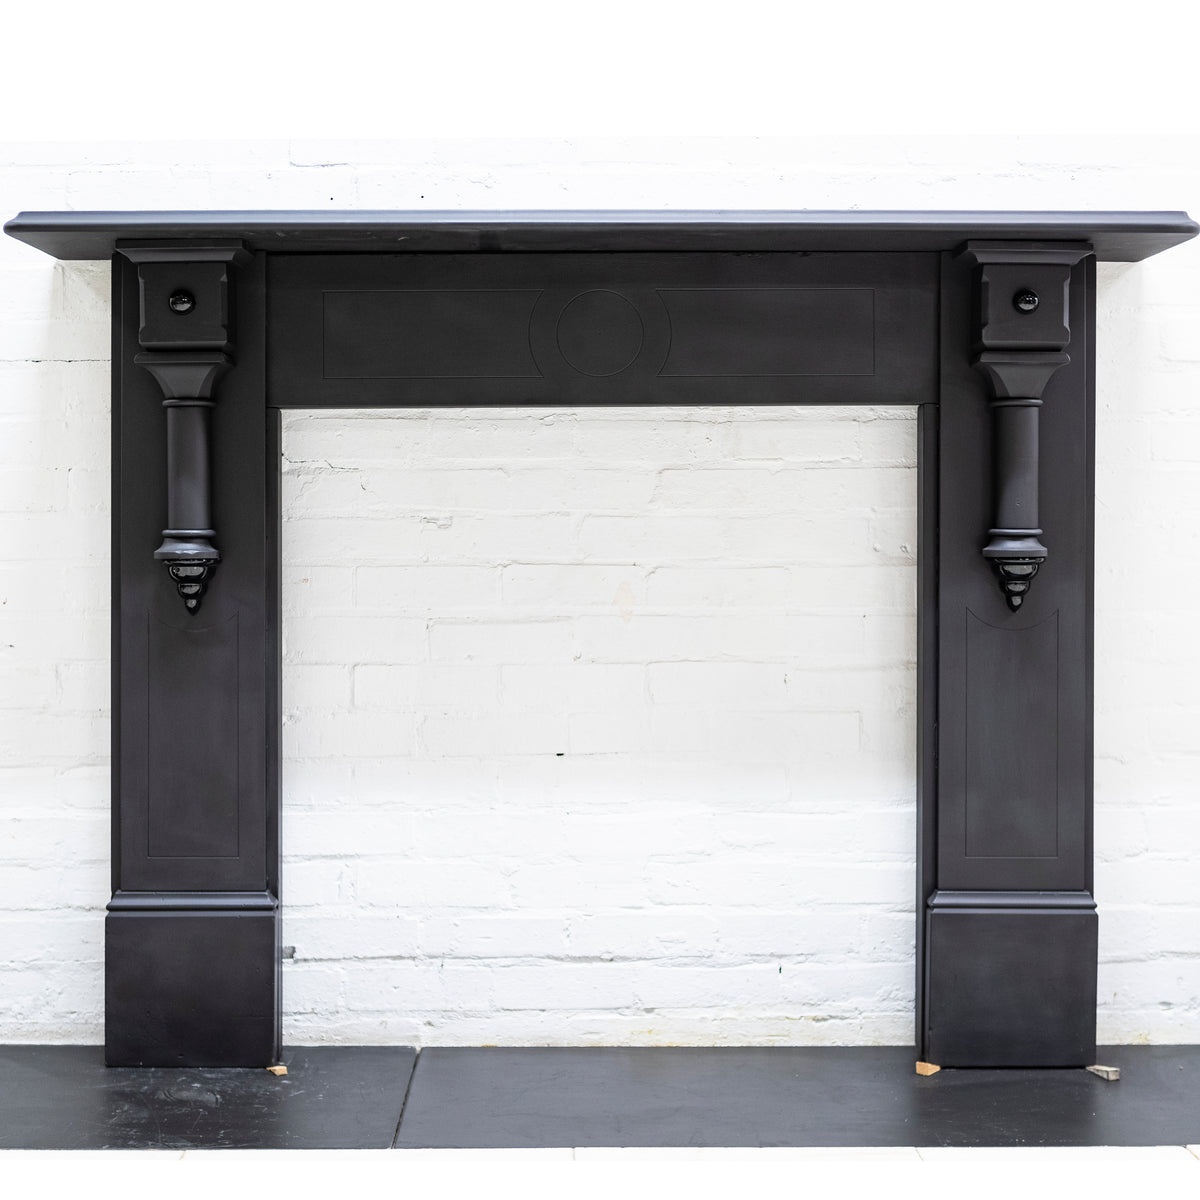 Antique Victorian Slate Fireplace Surround With Corbels | The Architectural Forum